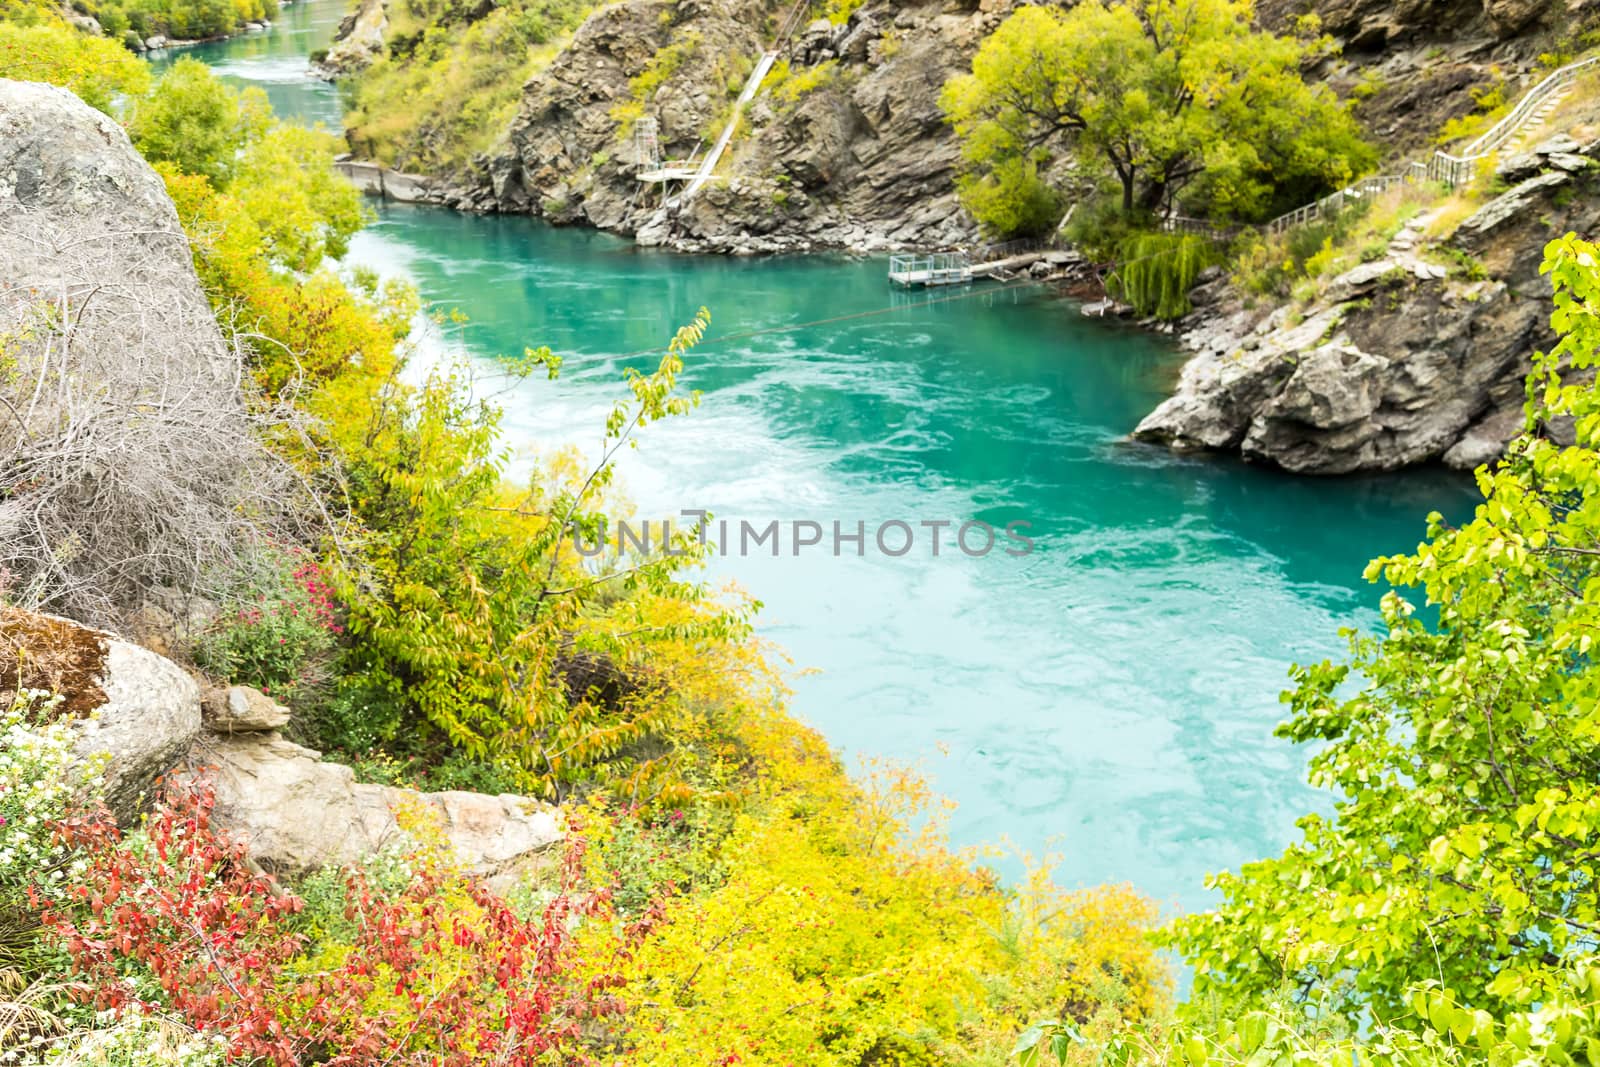 Queenstown in New Zealand by SeuMelhorClick